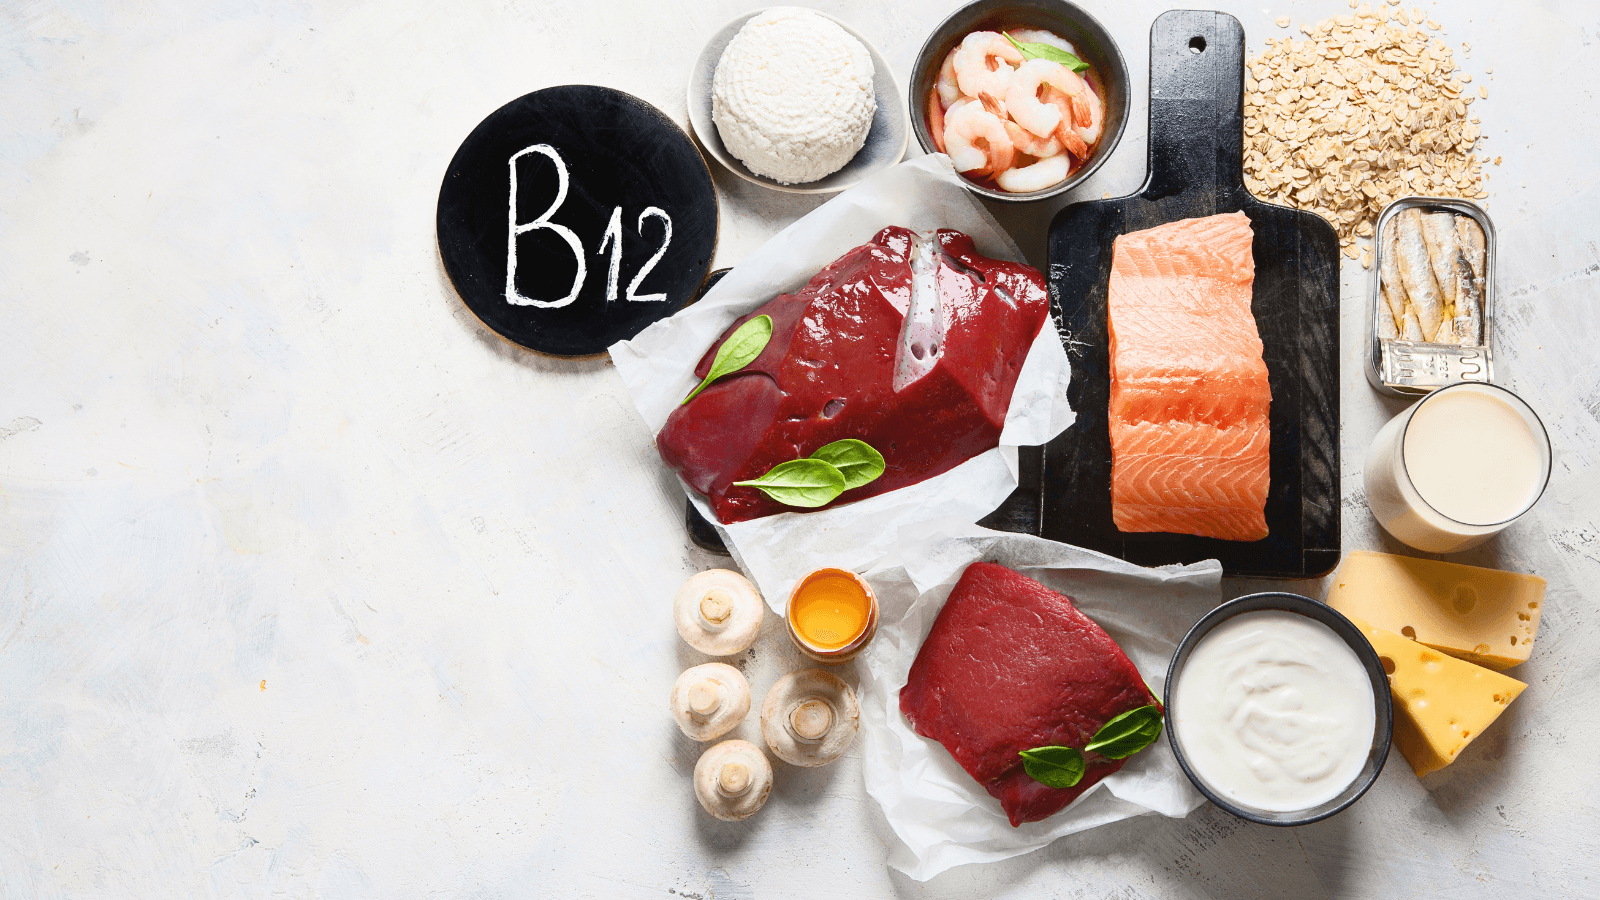 Vitamin B12: what you need to know